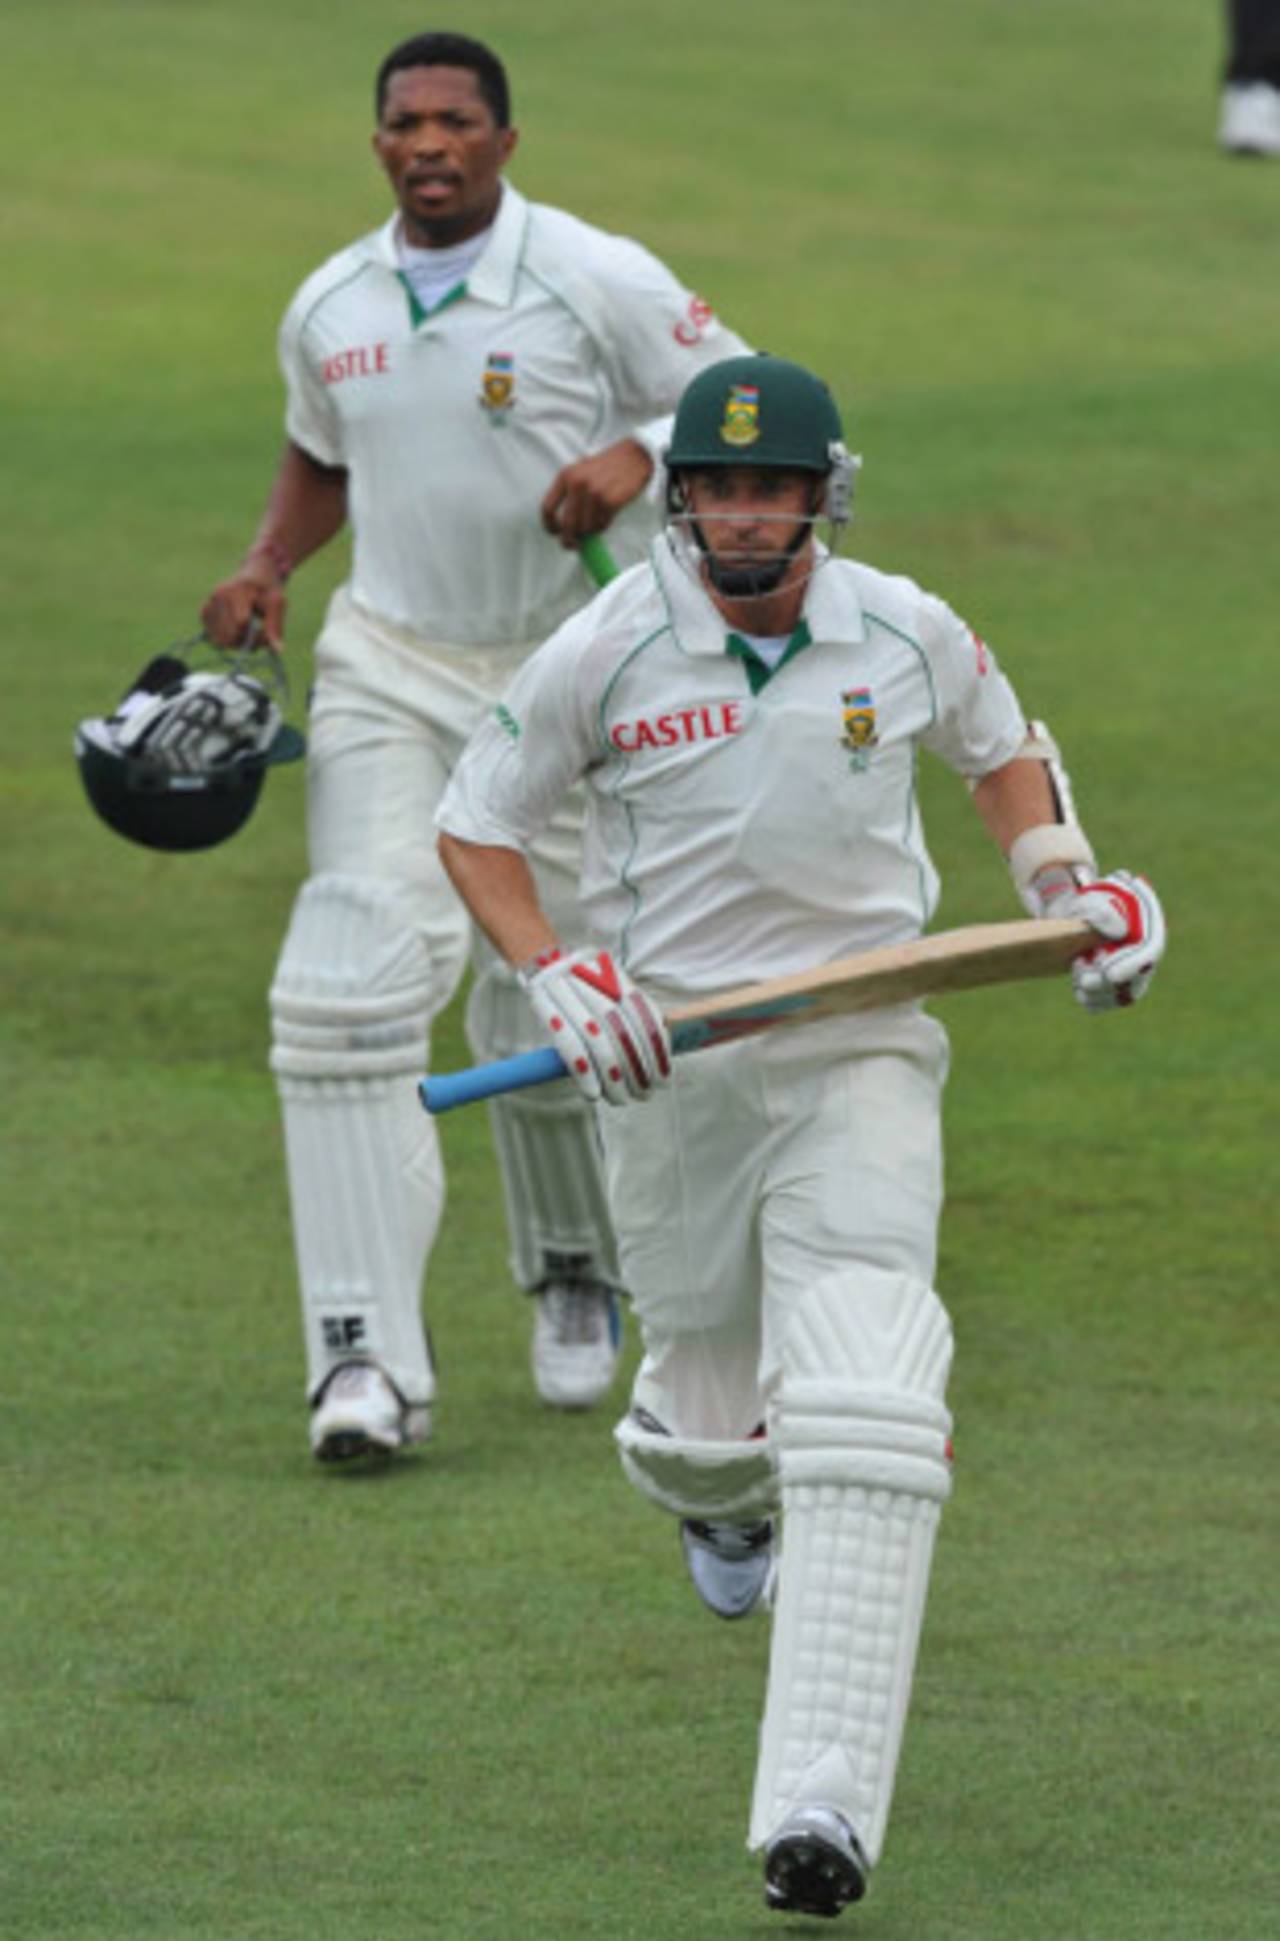 Dale Steyn and Makhaya Ntini rush to don their bowling boots, after adding 58 for South Africa's tenth wicket, South Africa v England, 2nd Test, Durban, December 27, 2009